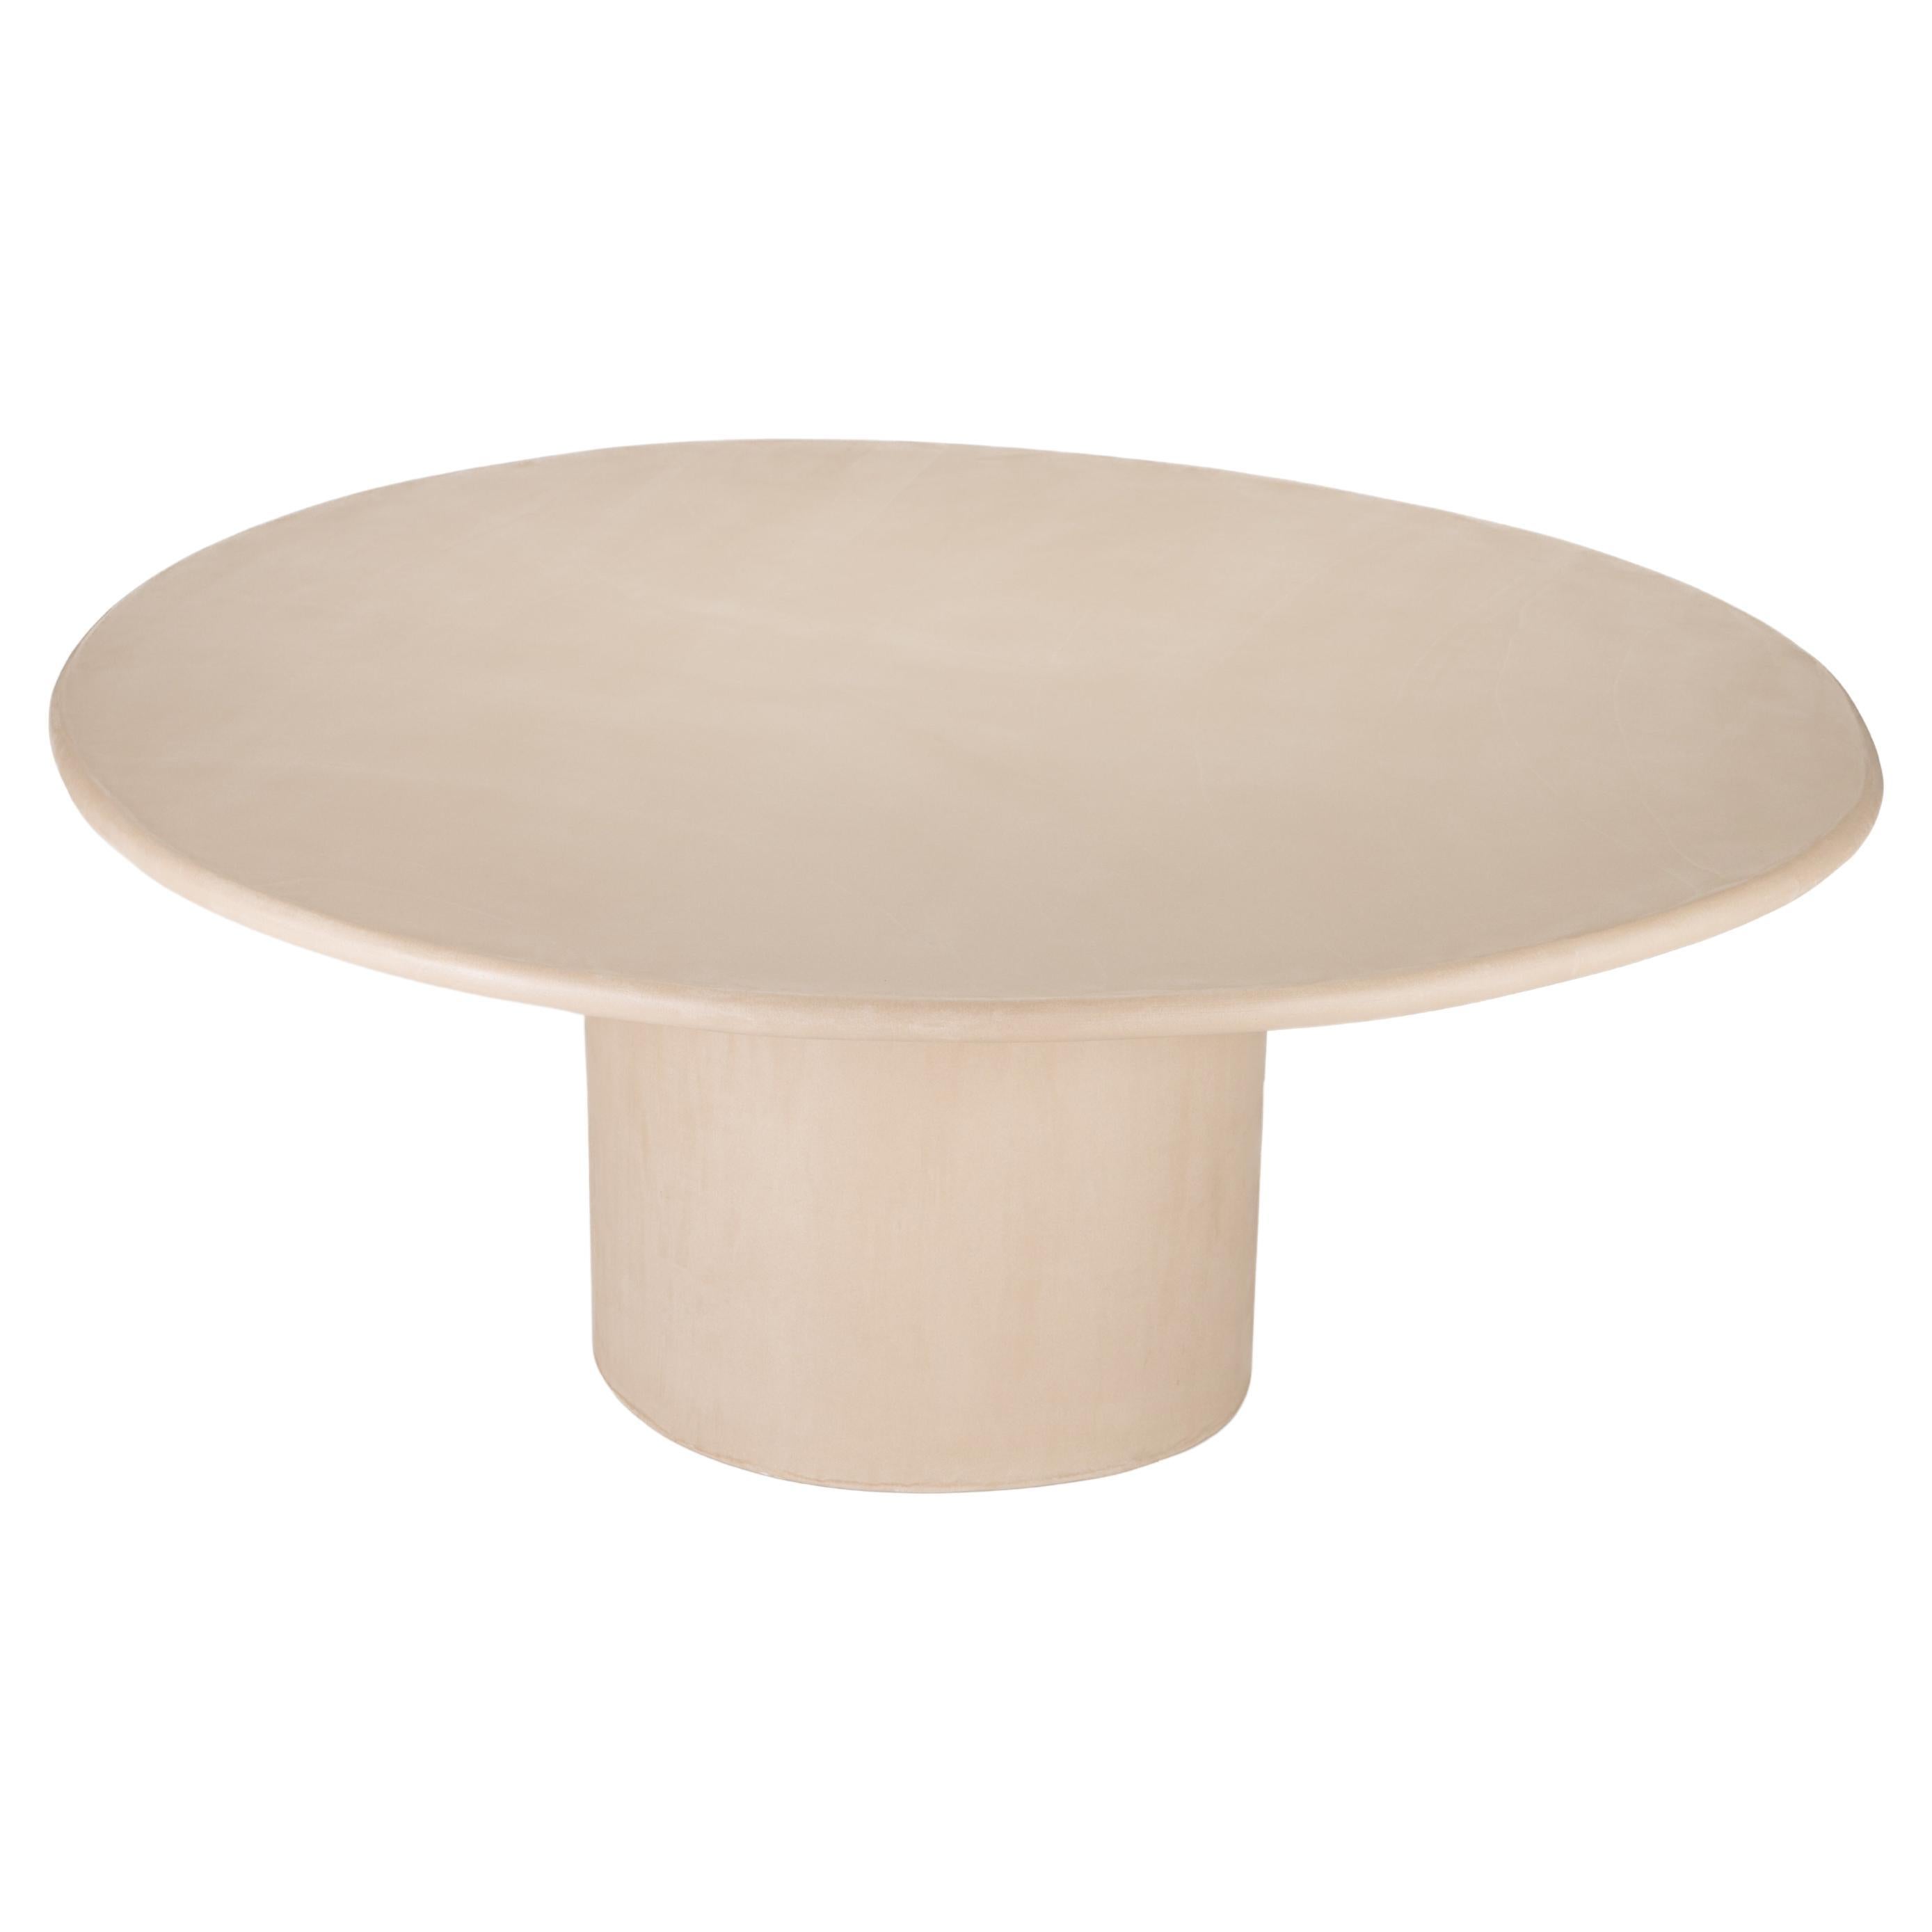 Organic Shaped Natural Plaster Dining Table "Sami" 170 by Isabelle Beaumont For Sale